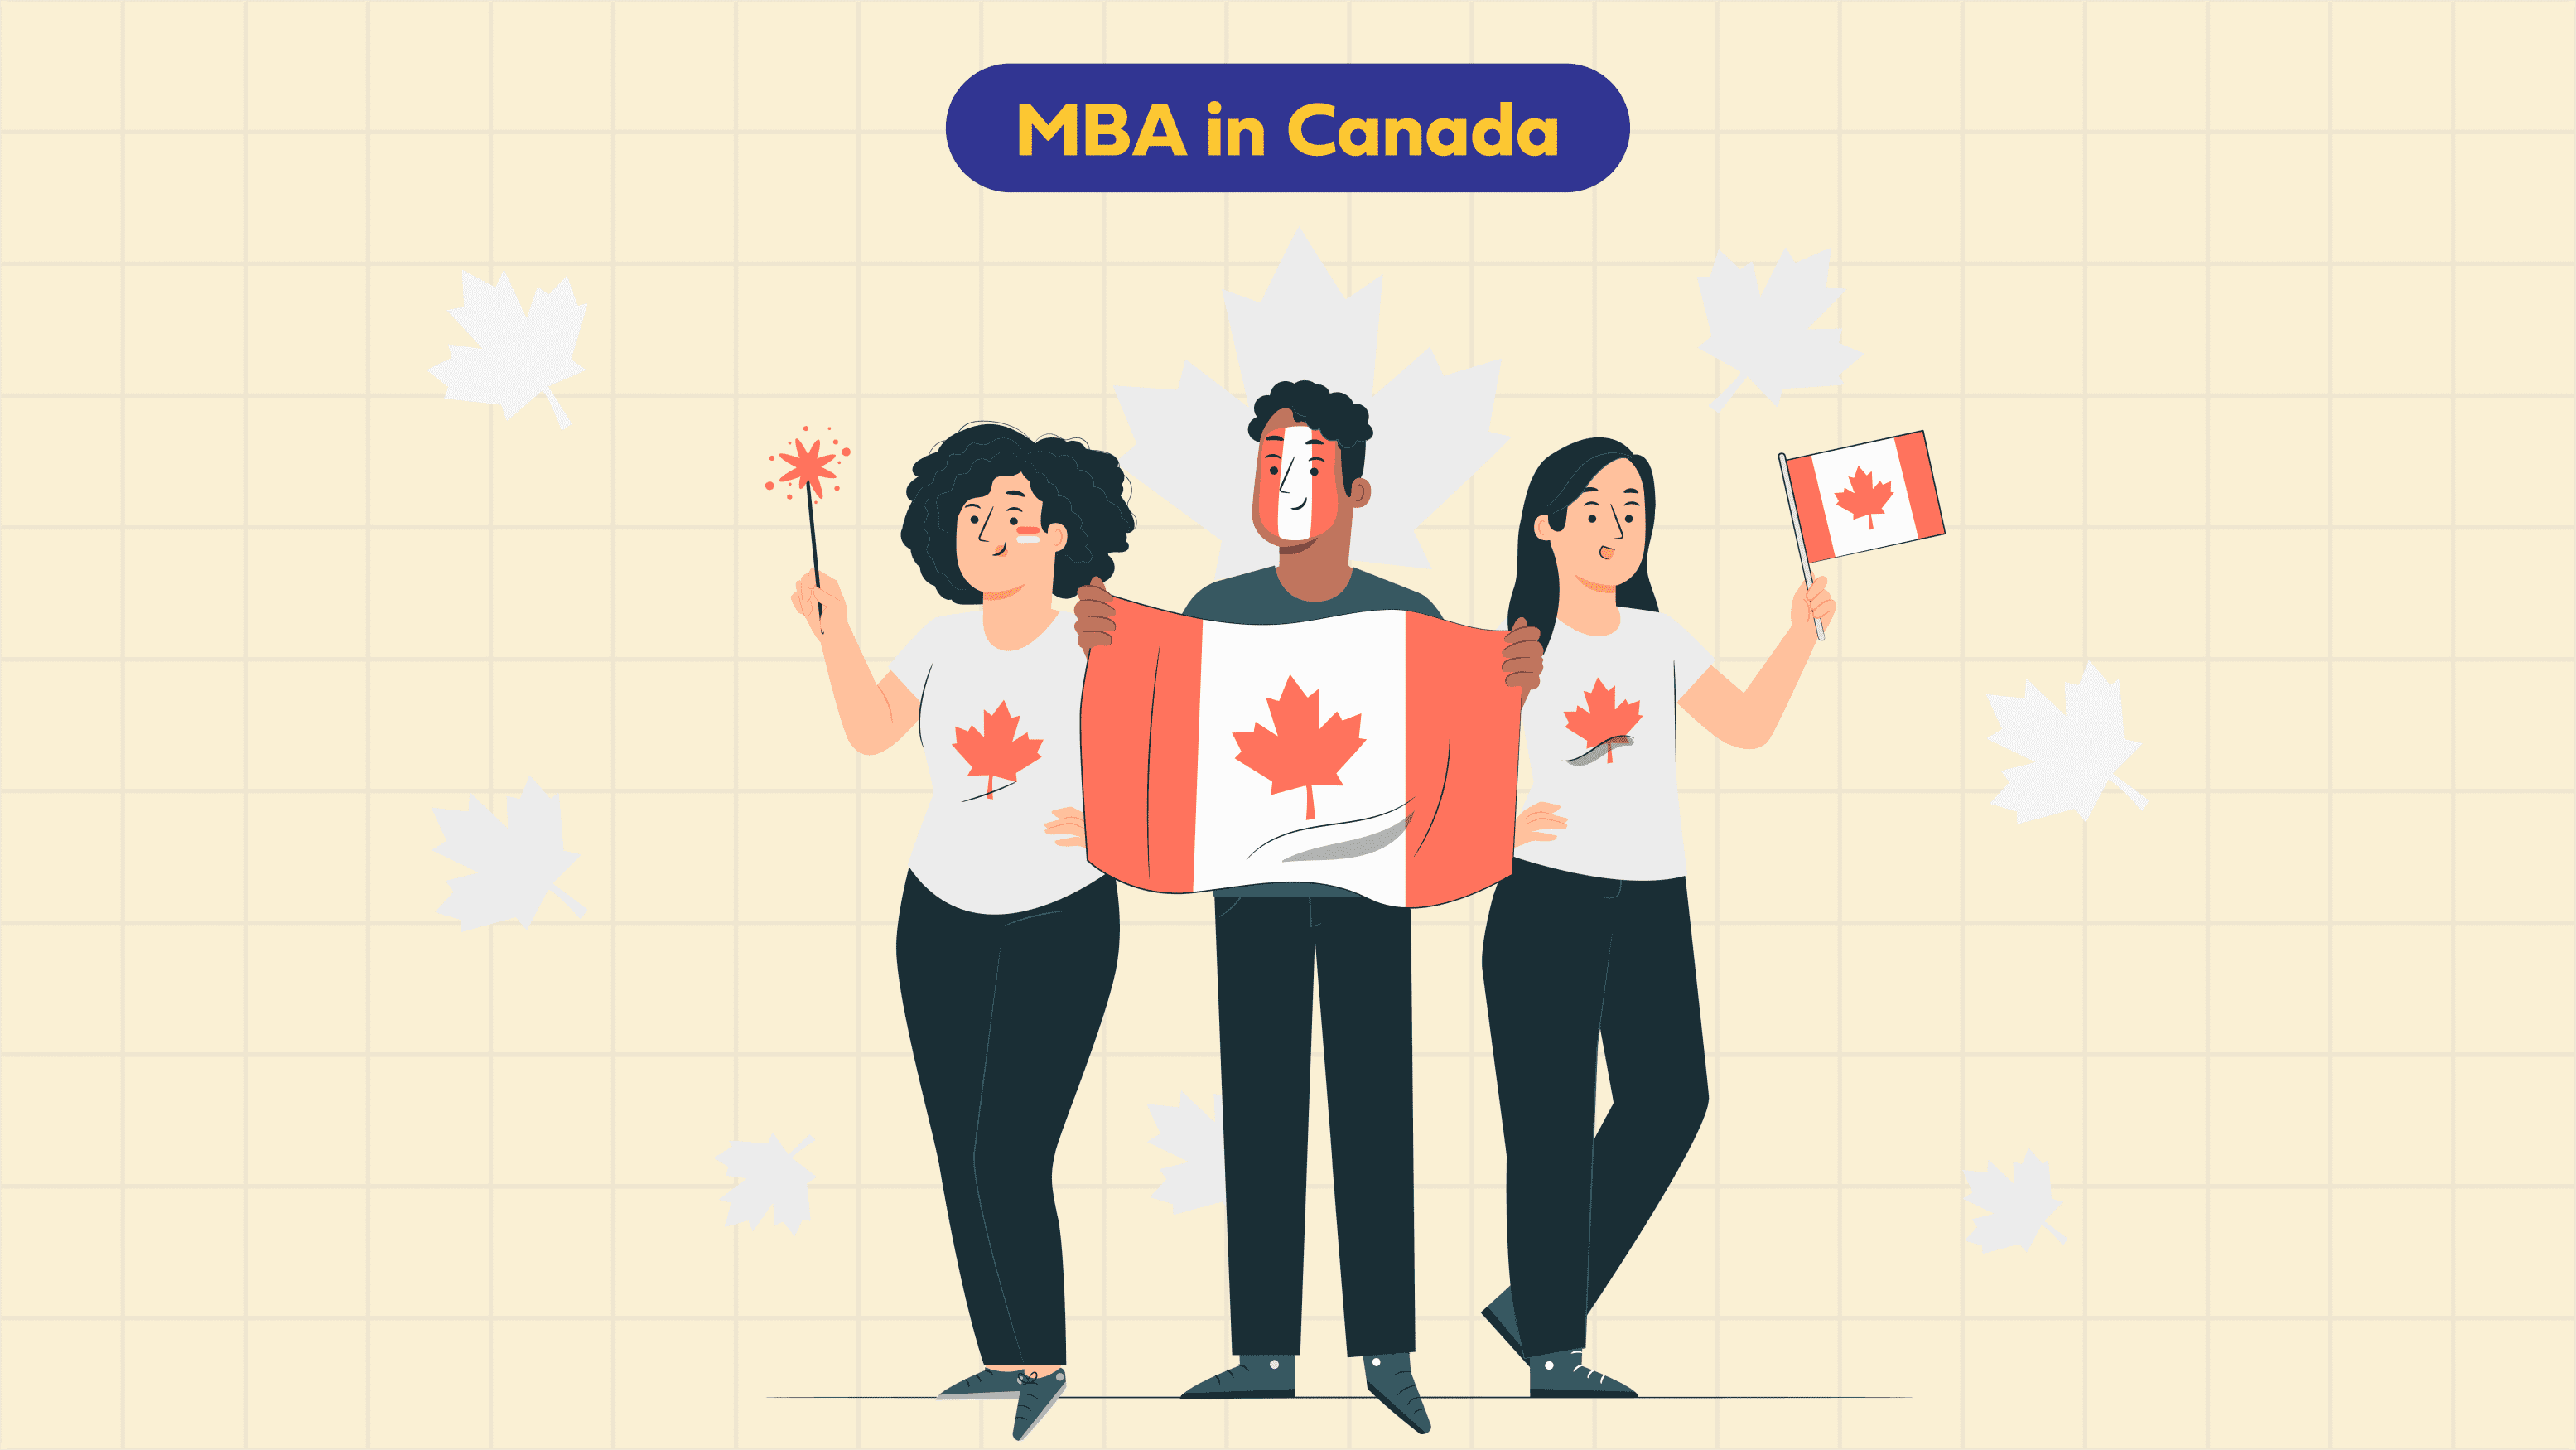 Top Reasons for Pursuing MBA in Canada